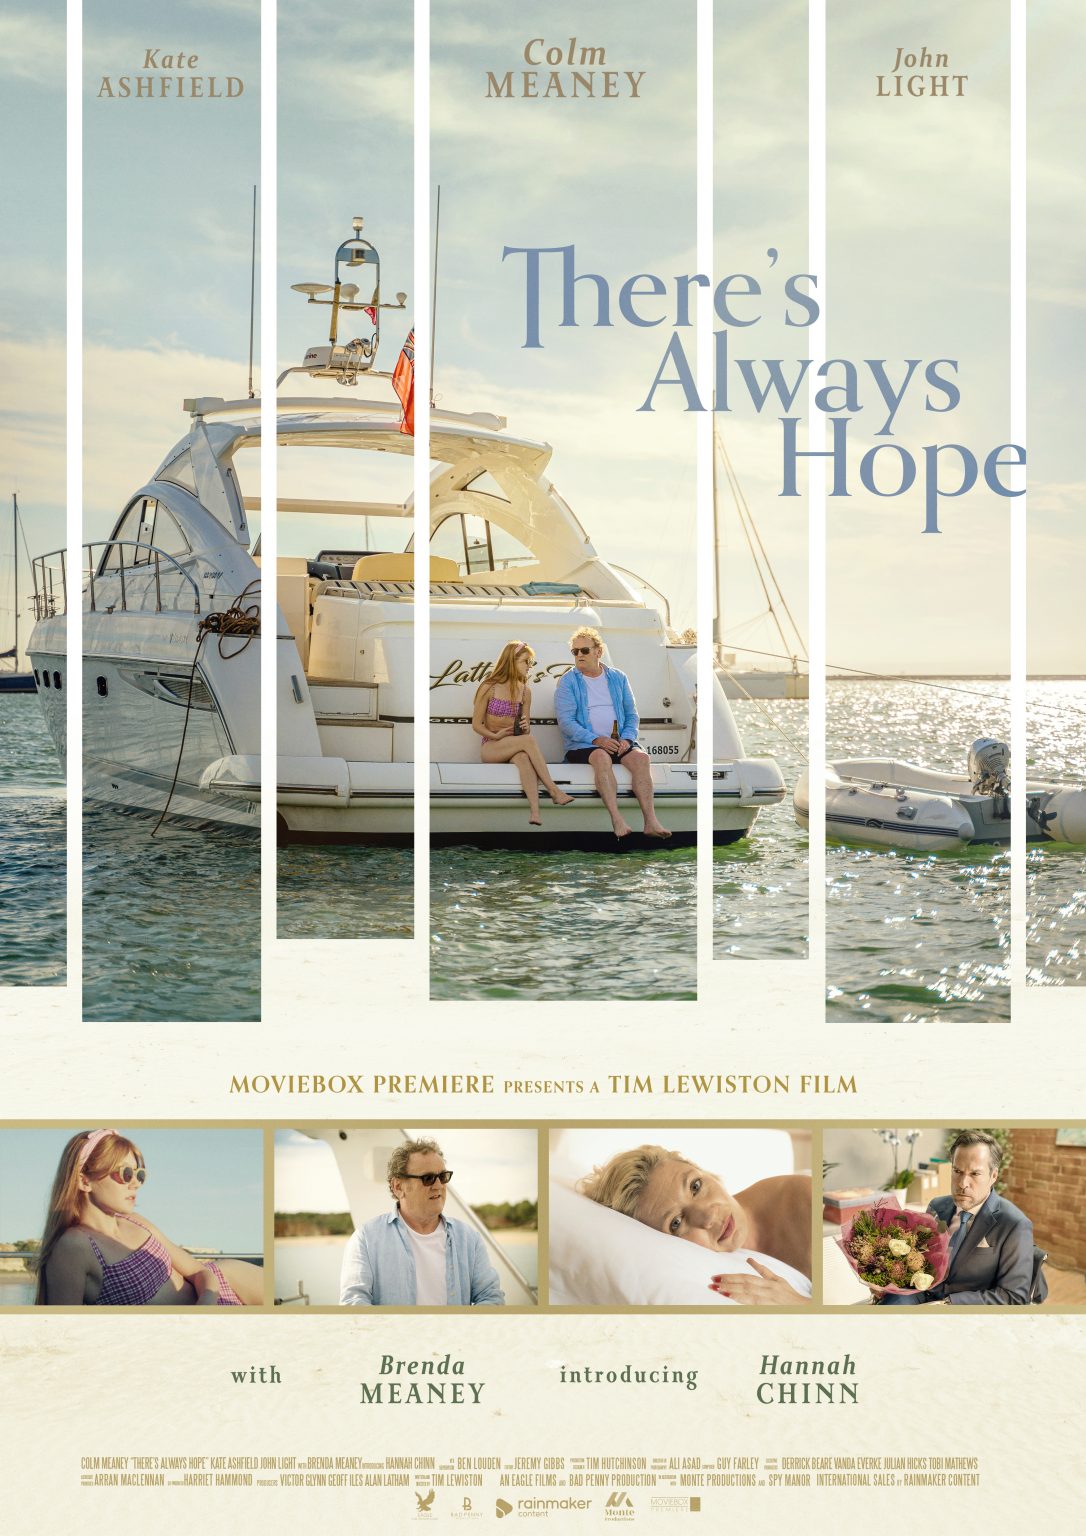 There's Always Hope Feature Film by Tim Lewiston Colm Meaney in association with Spy Manor Productions, executive producer Vanda Everke